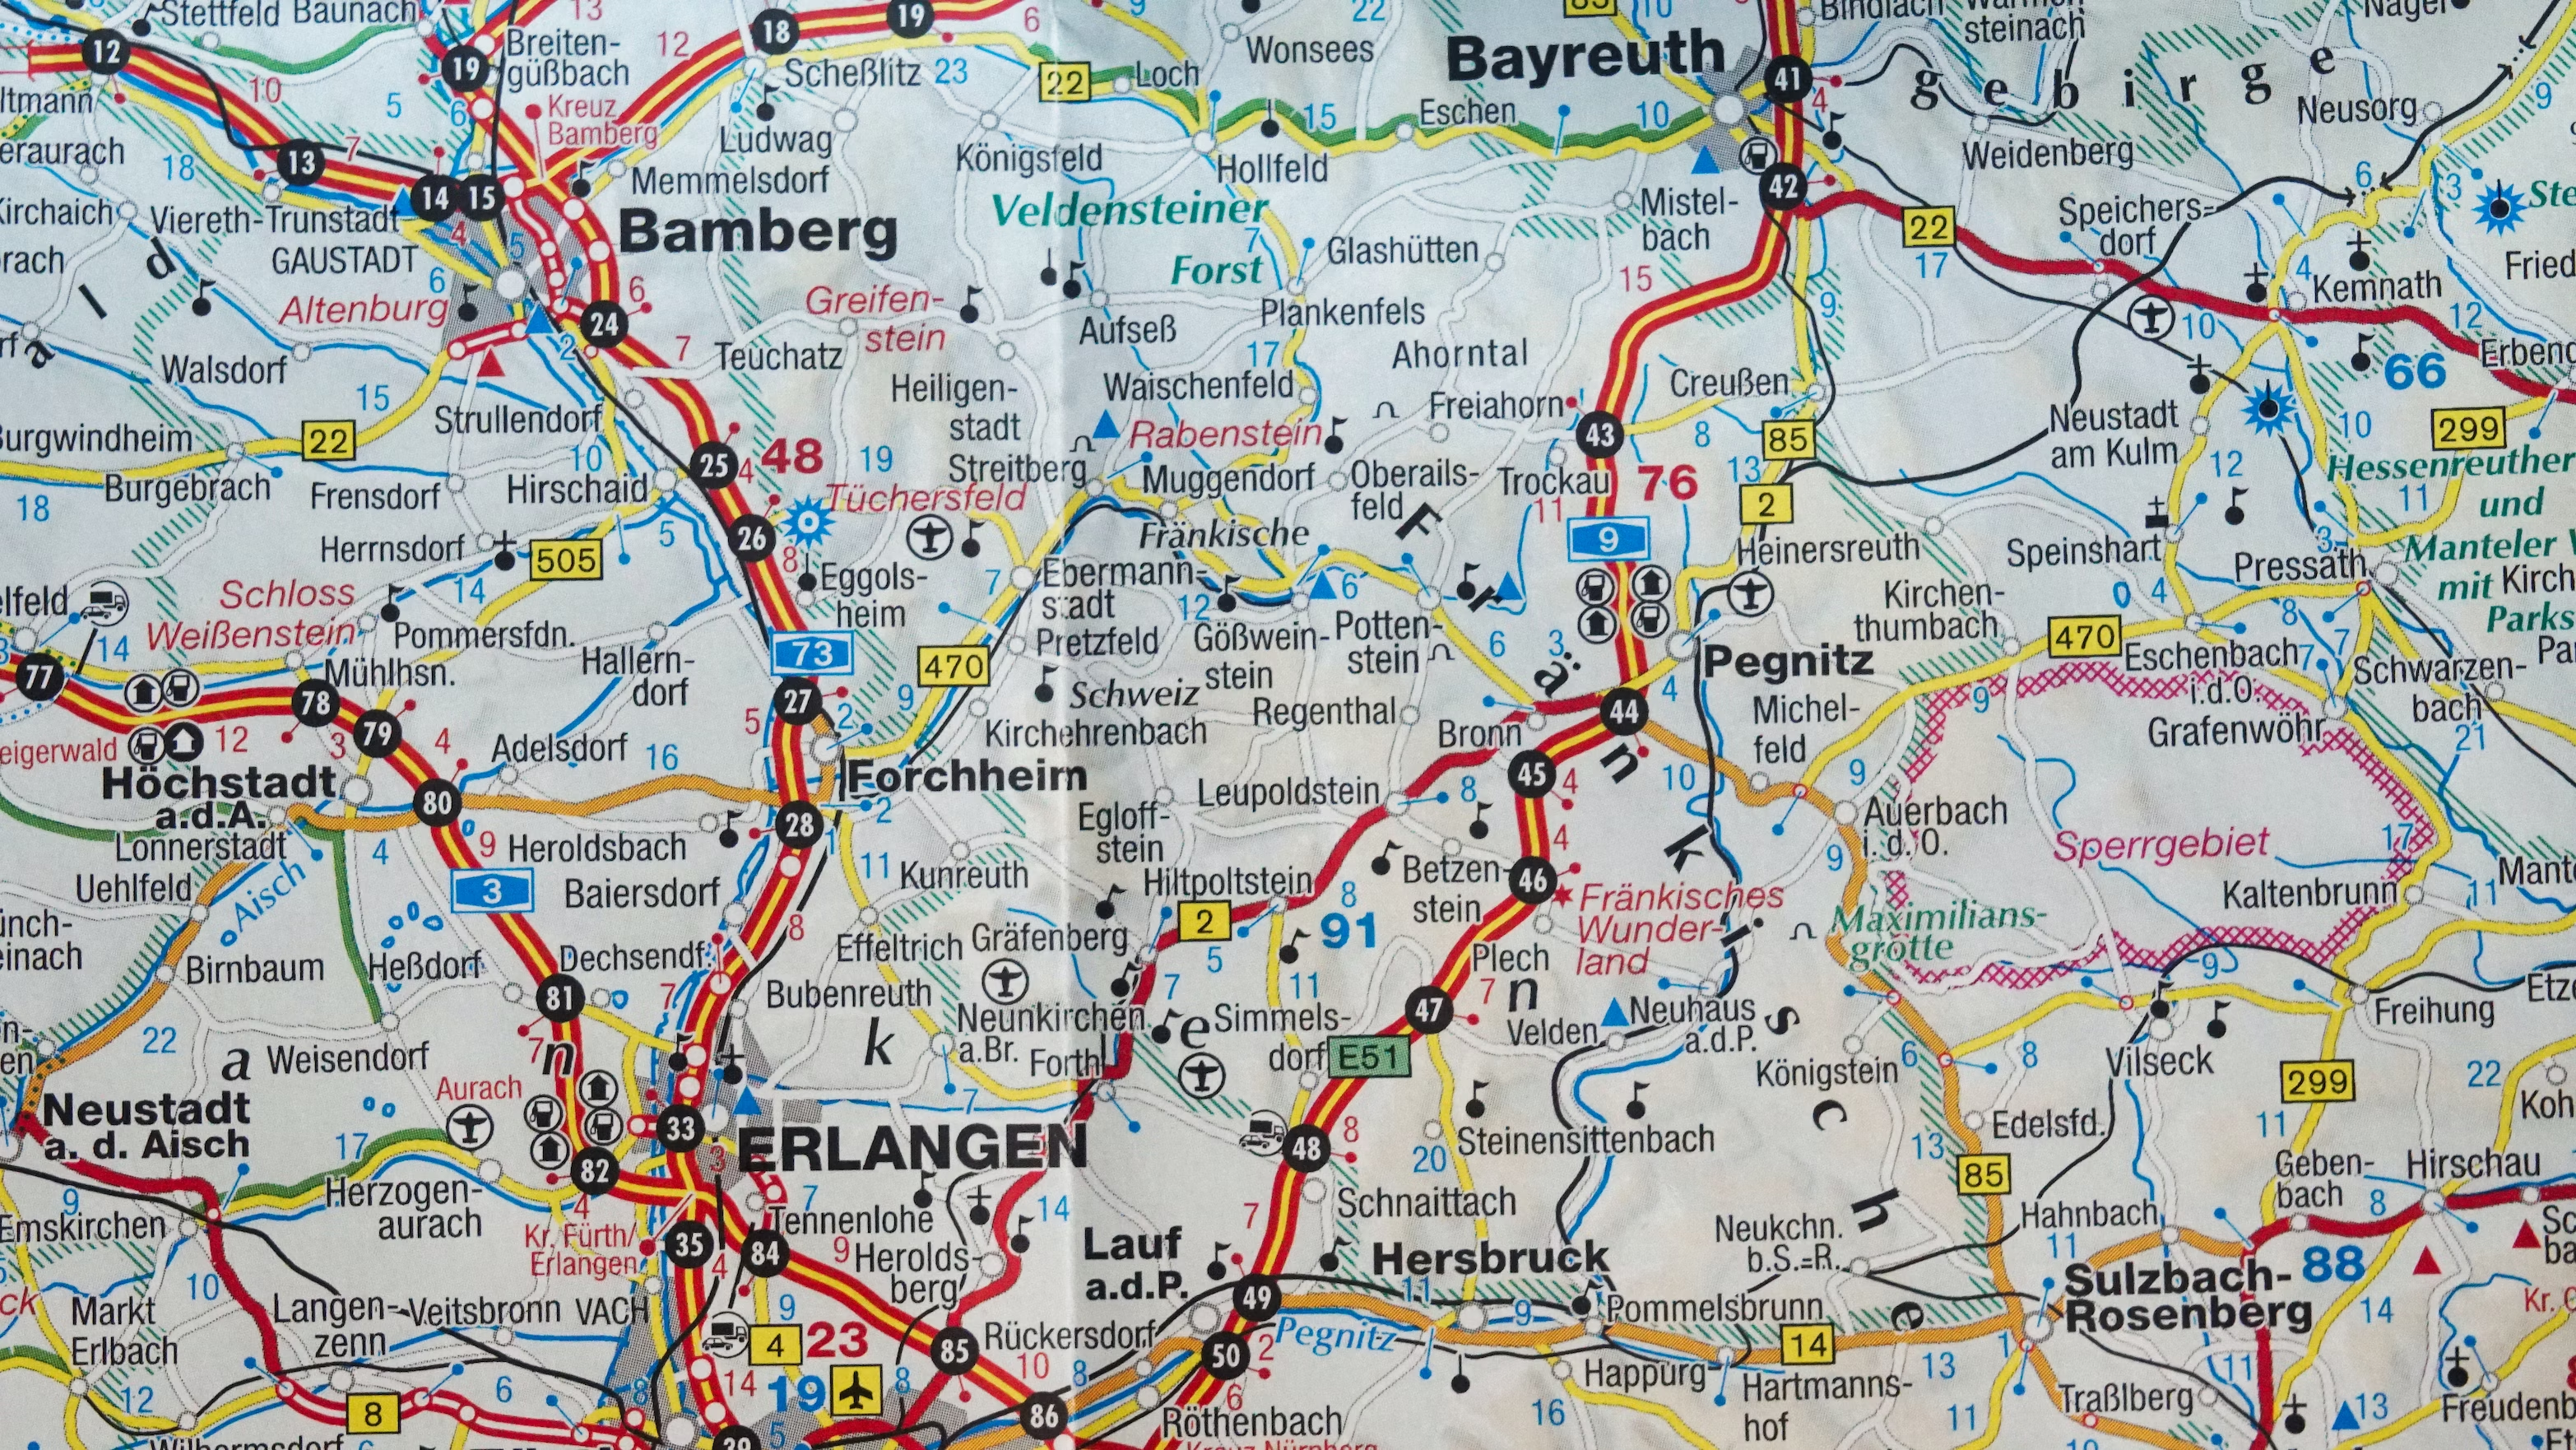 Close-up photo of a road map focusing on the Bavarian region in Germany, showing towns like Bamberg, Bayreuth, and Erlangen, with colored roads, symbols for points of interest, and geographical features such as the Veldensteiner Forst and Pegnitz river.